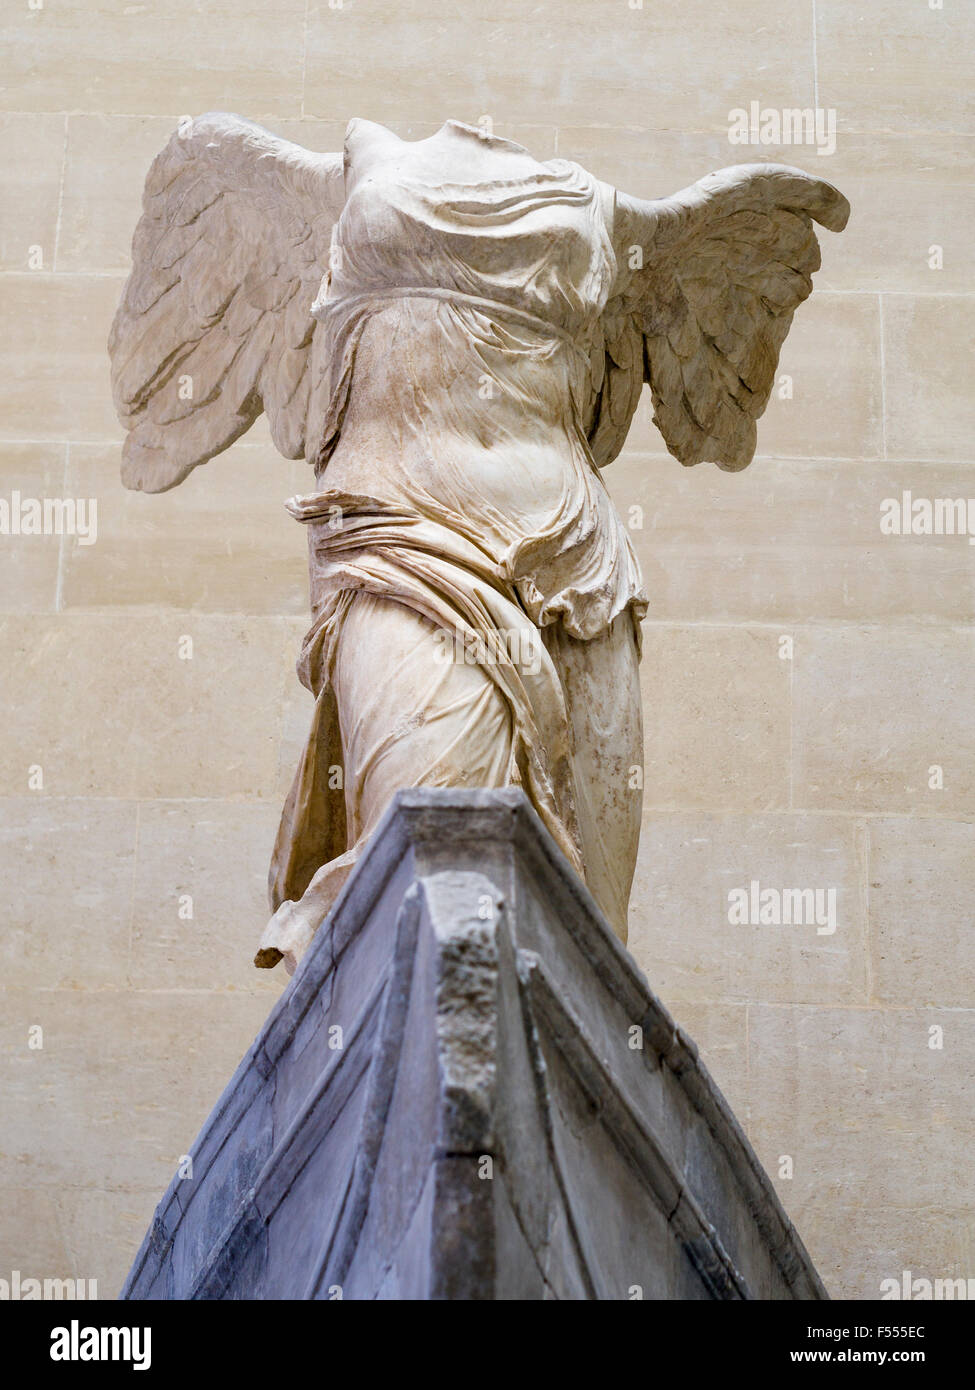 Marble sculpture of Winged Victory of Samothrace from below. A 2nd century BC sculpture of The Greek godess Nike or Victory foun Stock Photo